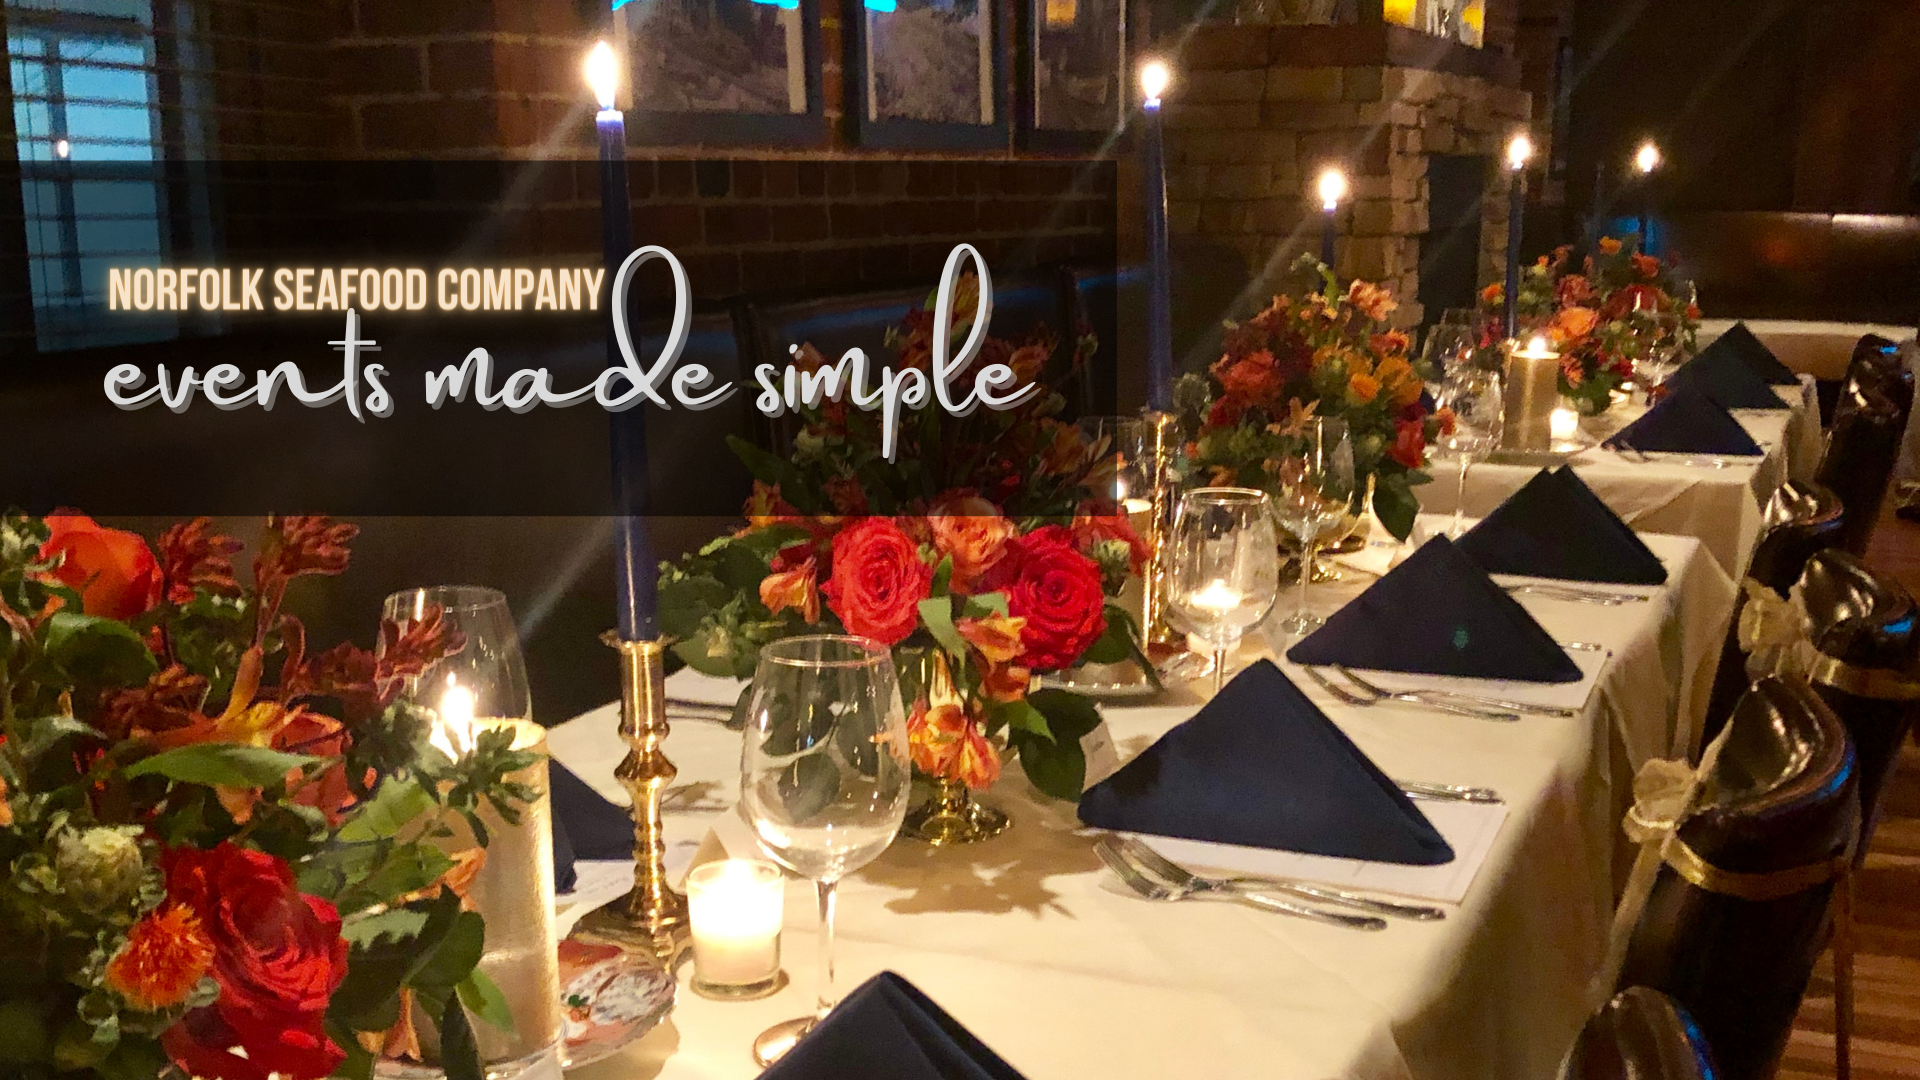 Norfolk Seafood Company Events made simple